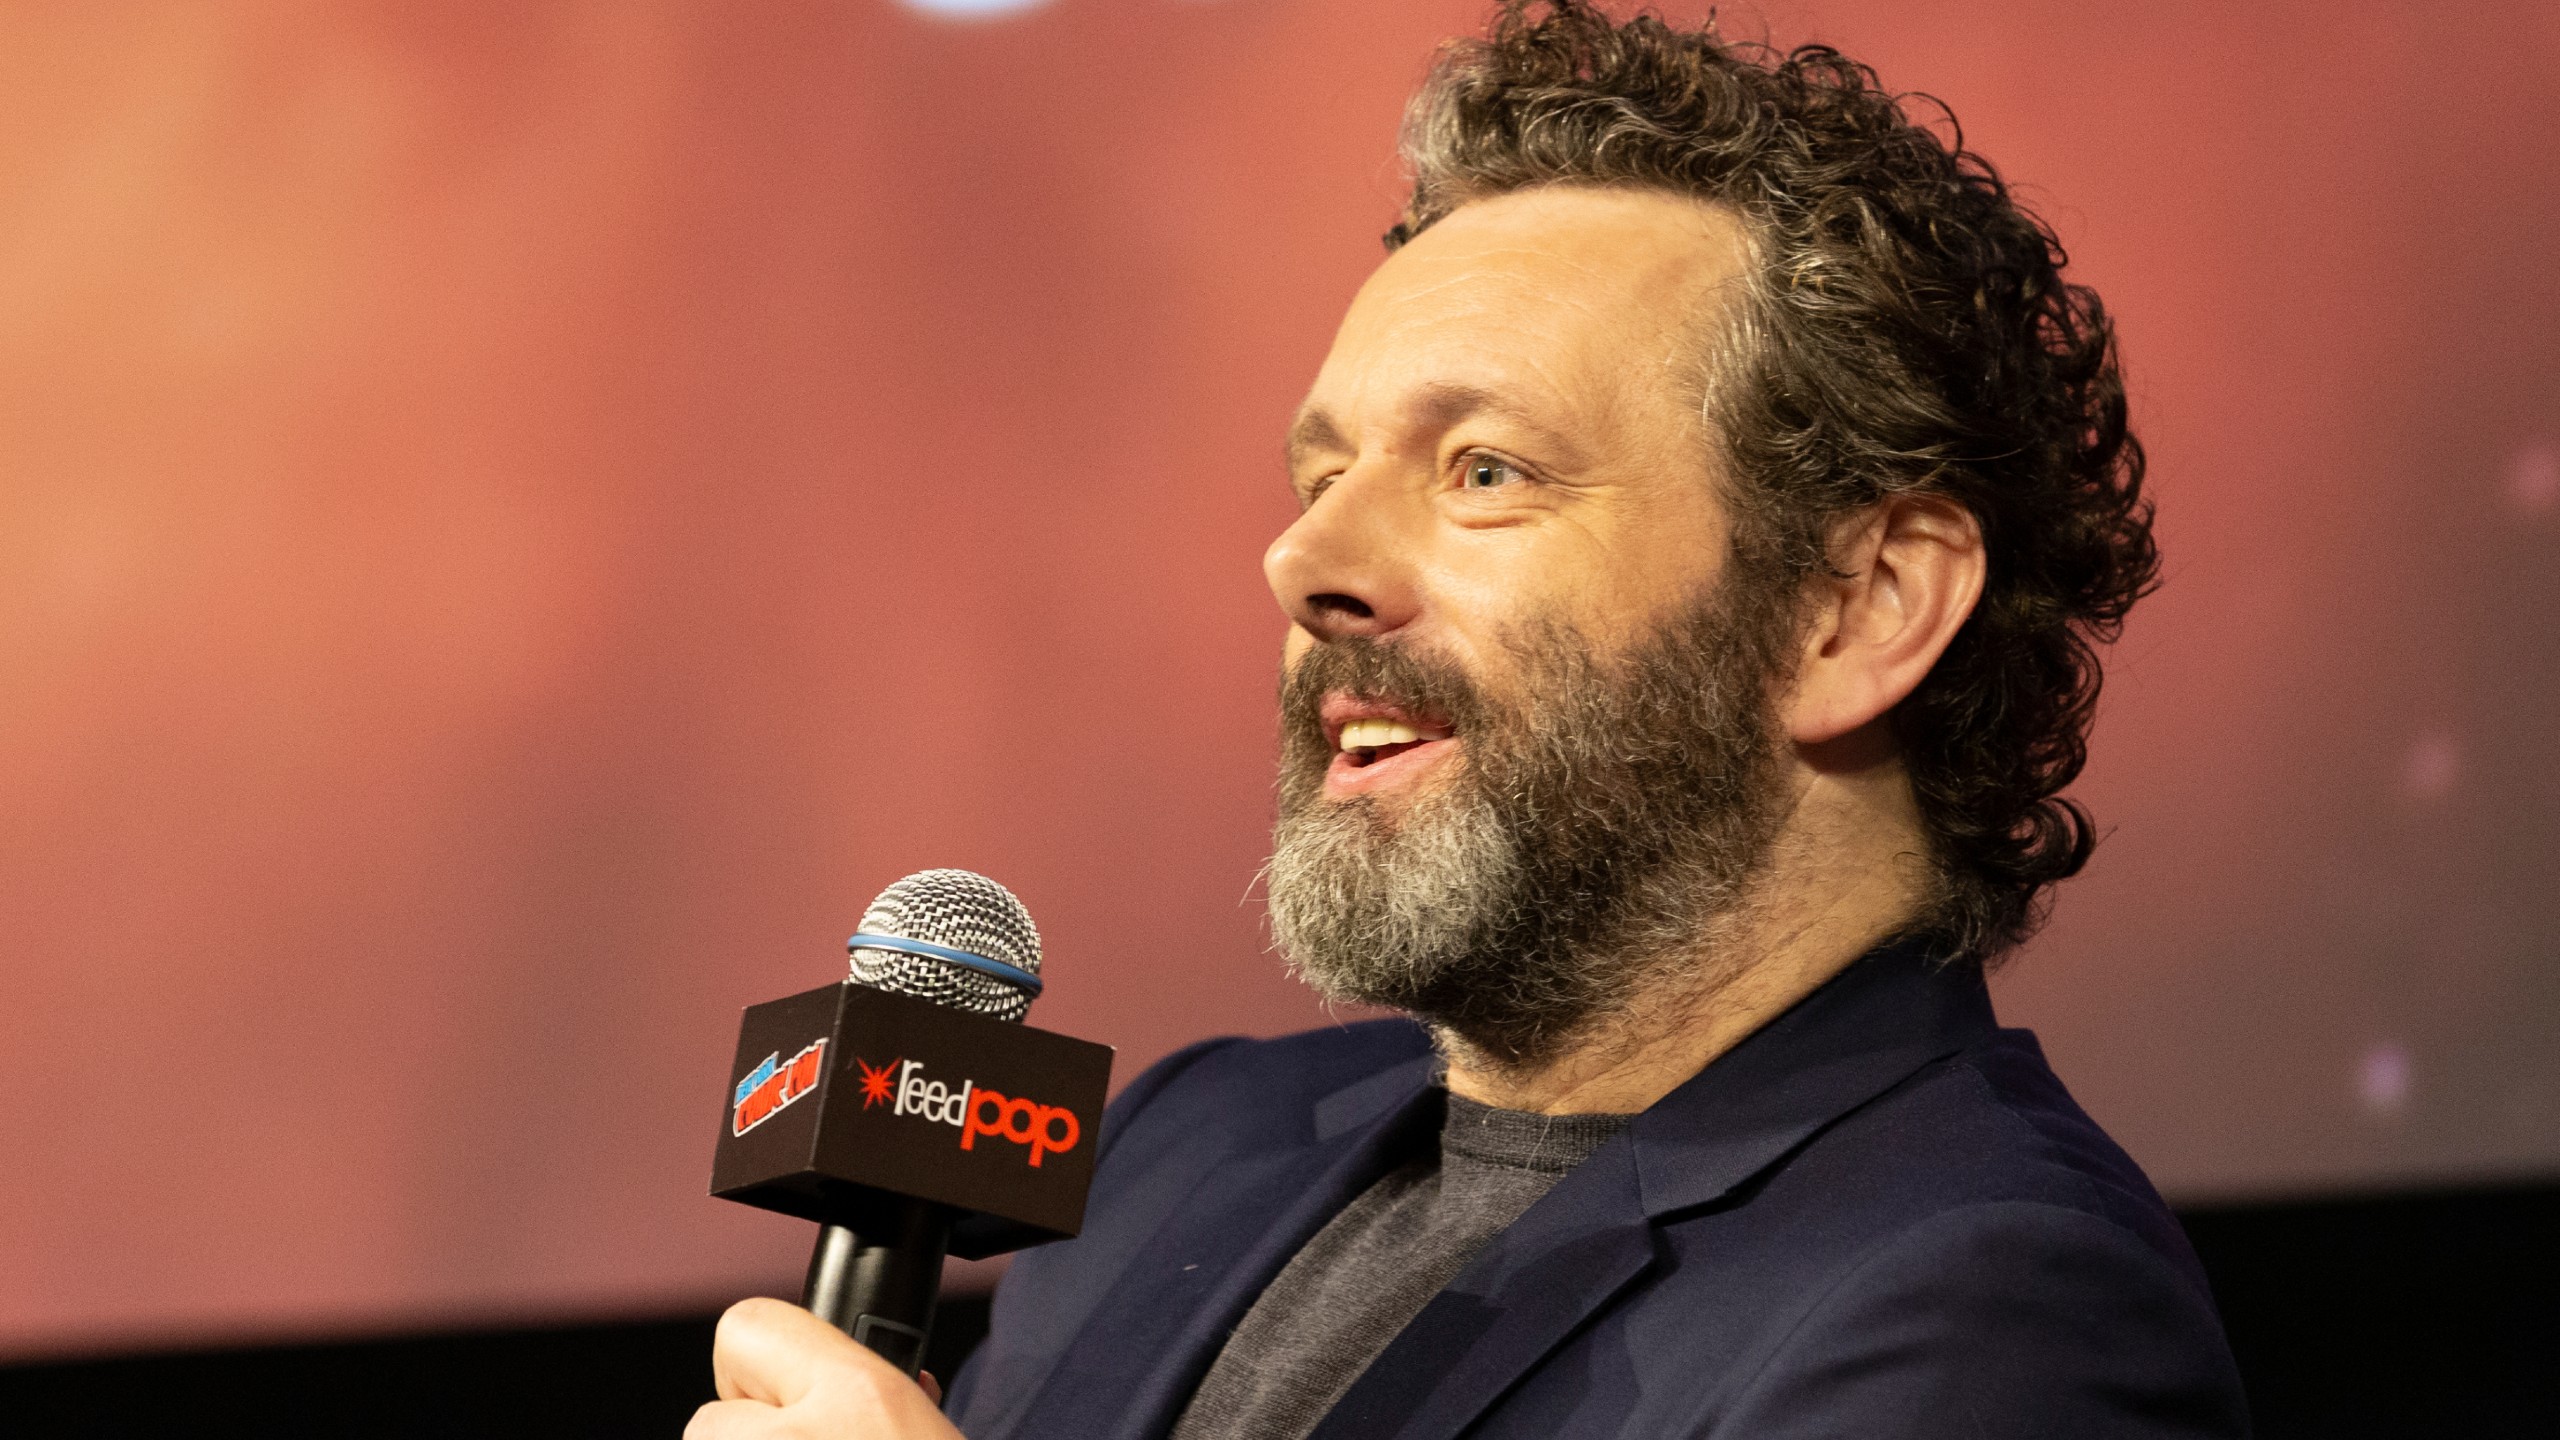 Michael Sheen Becomes “Not-for-Profit” actor to Fund His Charity Work